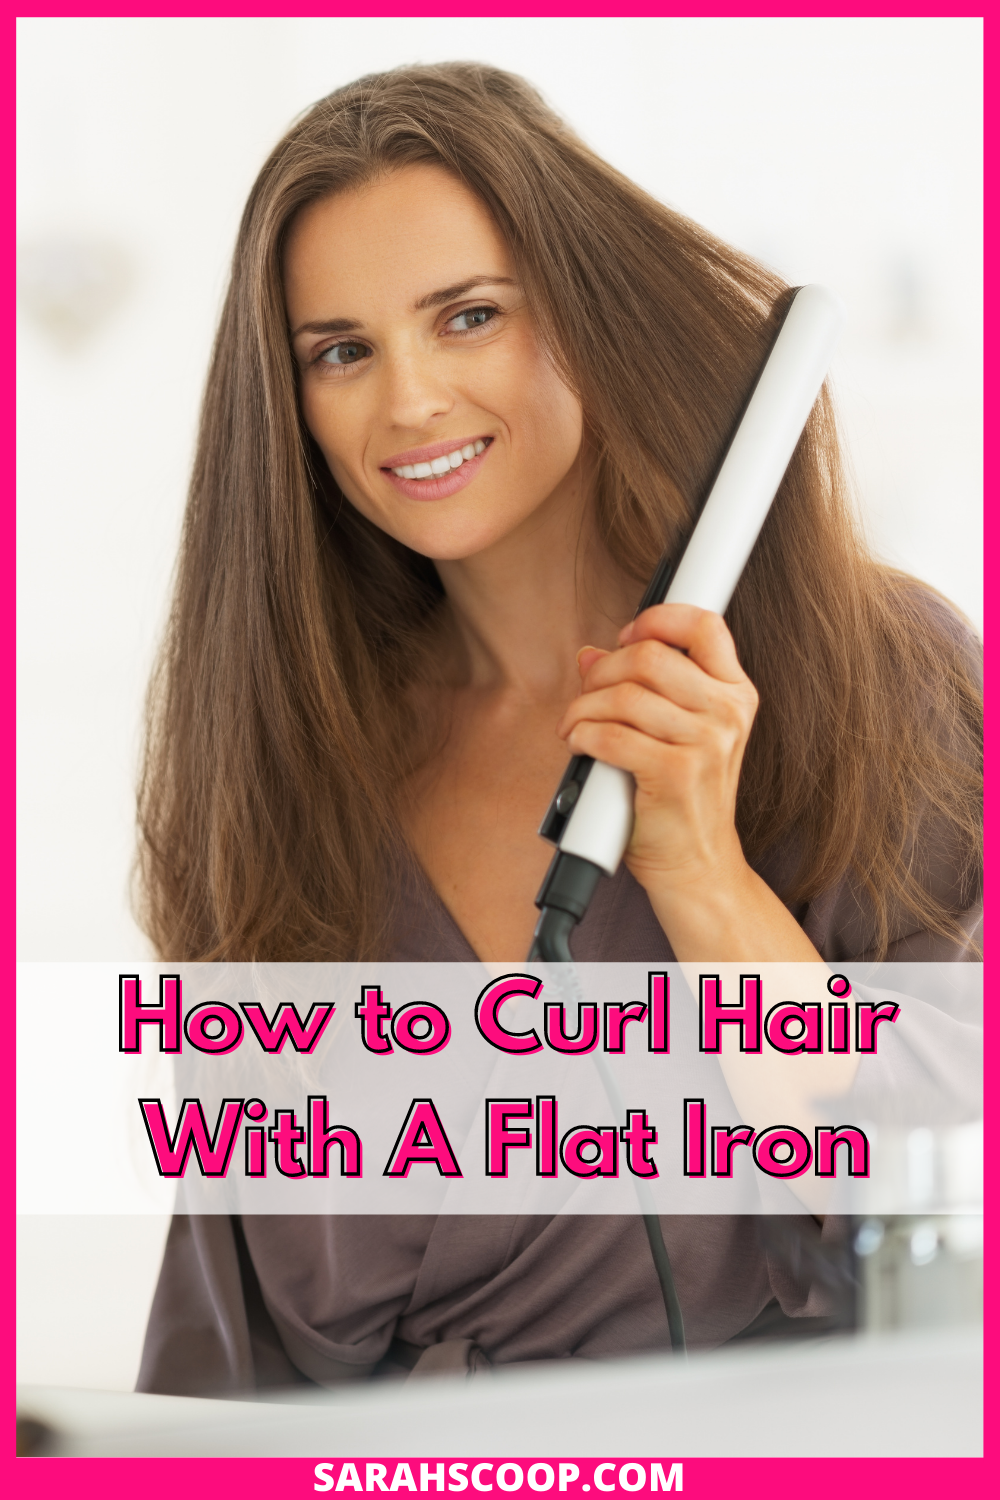 A guide on curling hair using a flat iron.